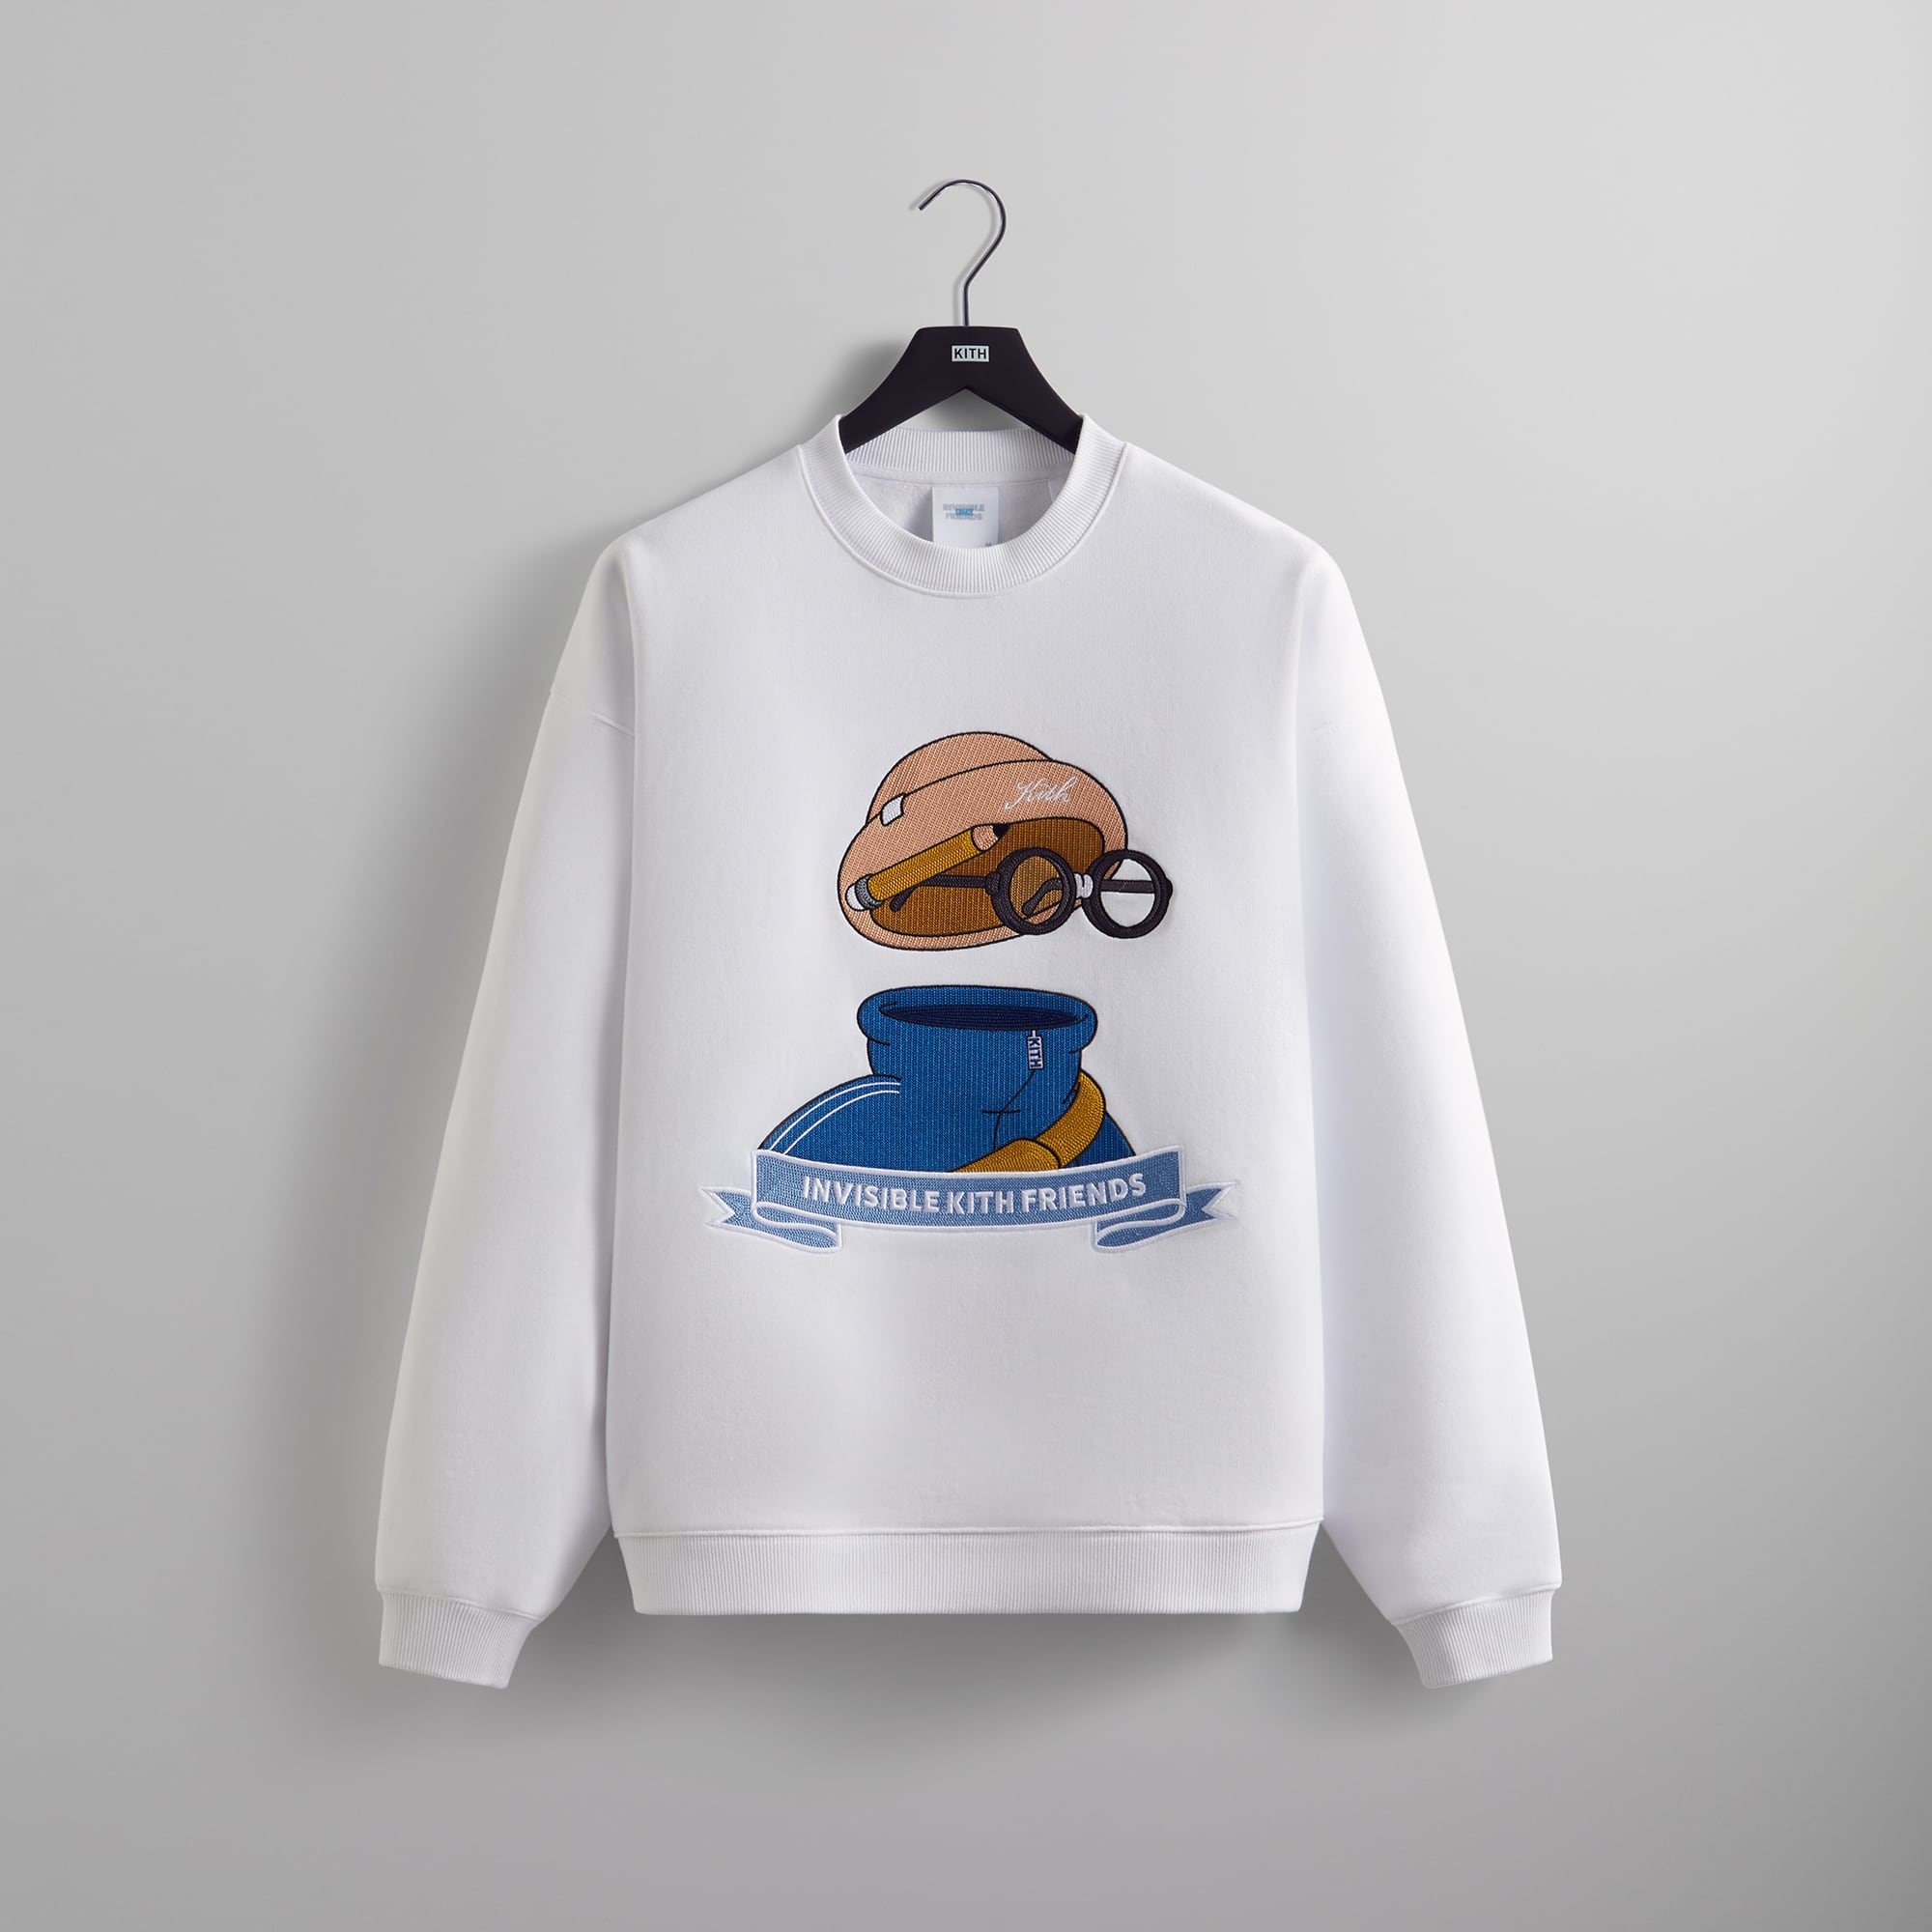 KITH x Invisible Friends M - Crewneck Sweater, White | RECEPTION SNEAKER  powered by BASE